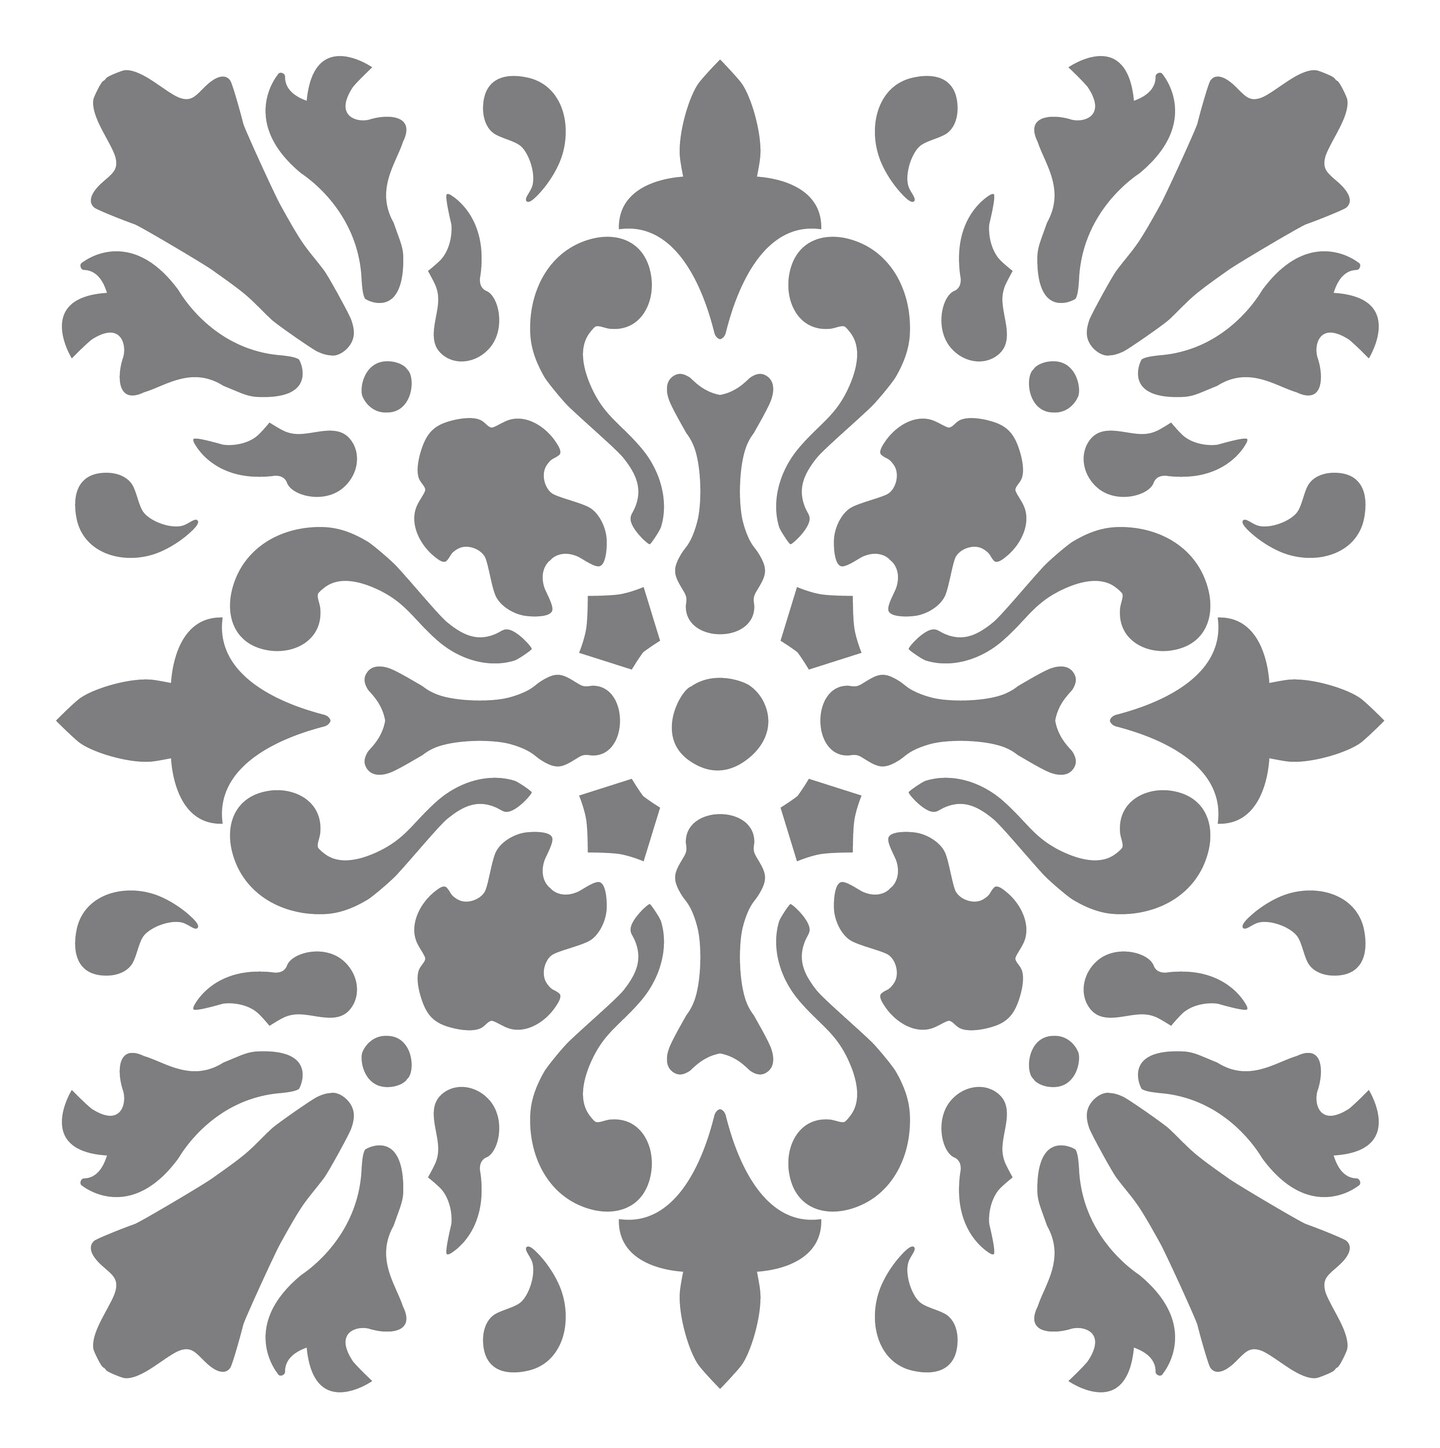 Marrakesh Tile Wall Stencil | 3804 by Designer Stencils | Pattern Stencils | Reusable Stencils for Painting | Safe &#x26; Reusable Template for Wall Decor | Try This Stencil Instead of a Wallpaper | Easy to Use &#x26; Clean Art Stencil Pattern